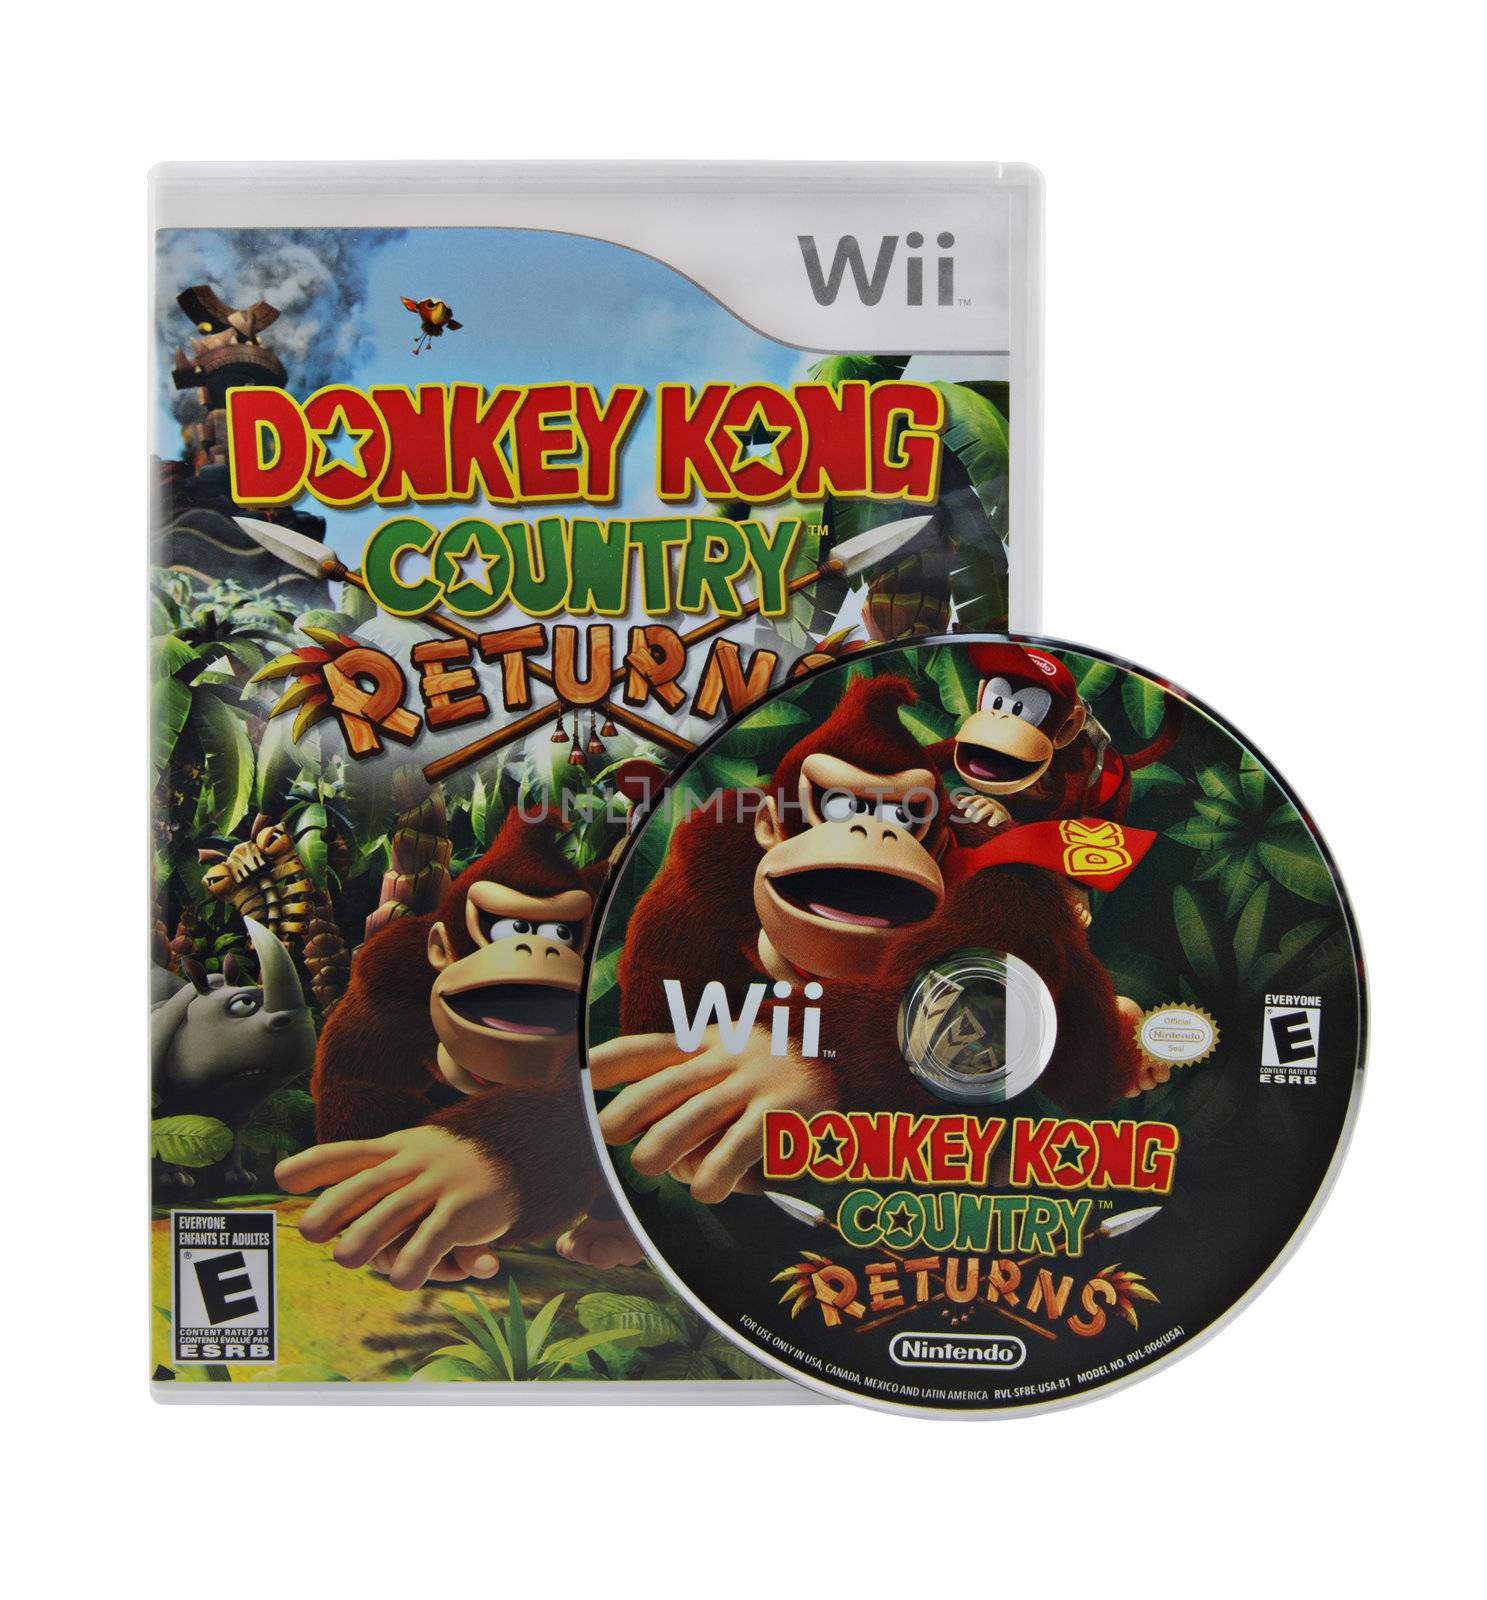 A studio shot on a white background of the popular Nintendo Wii video game Donkey Kong Country Returns.